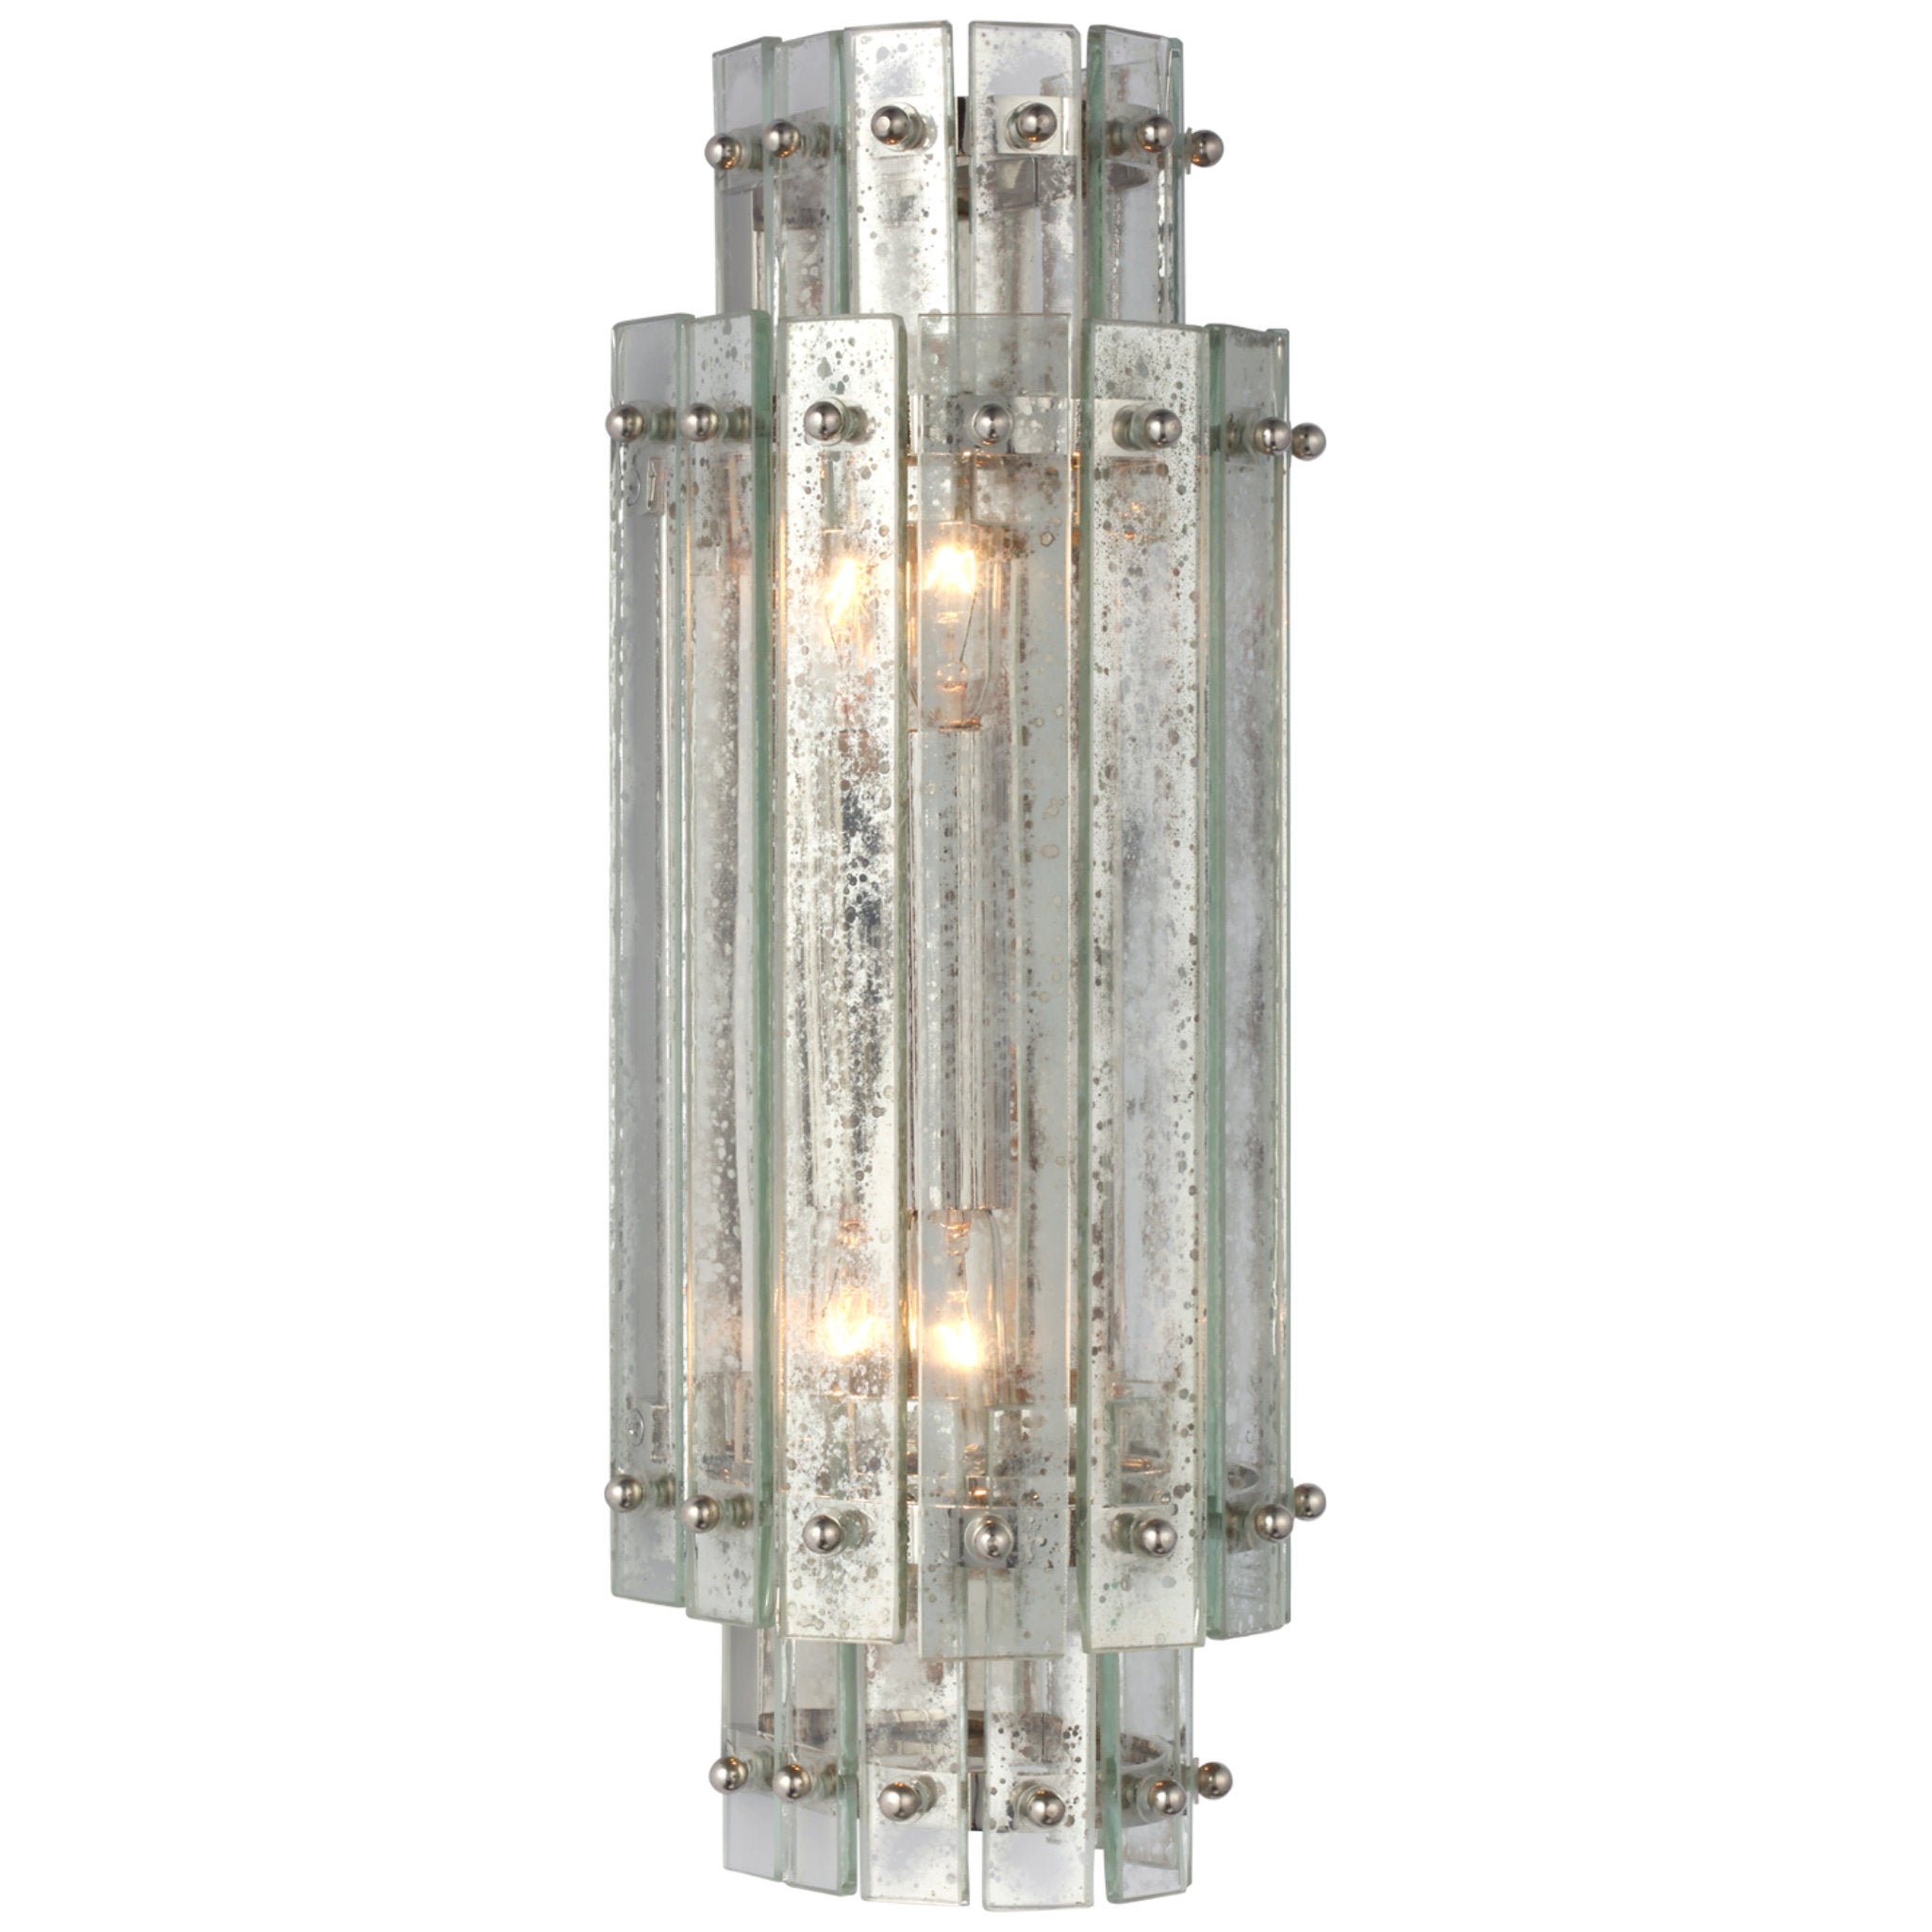 Carrier and Company Cadence Small Tiered Sconce in Polished Nickel with Antique Mirror